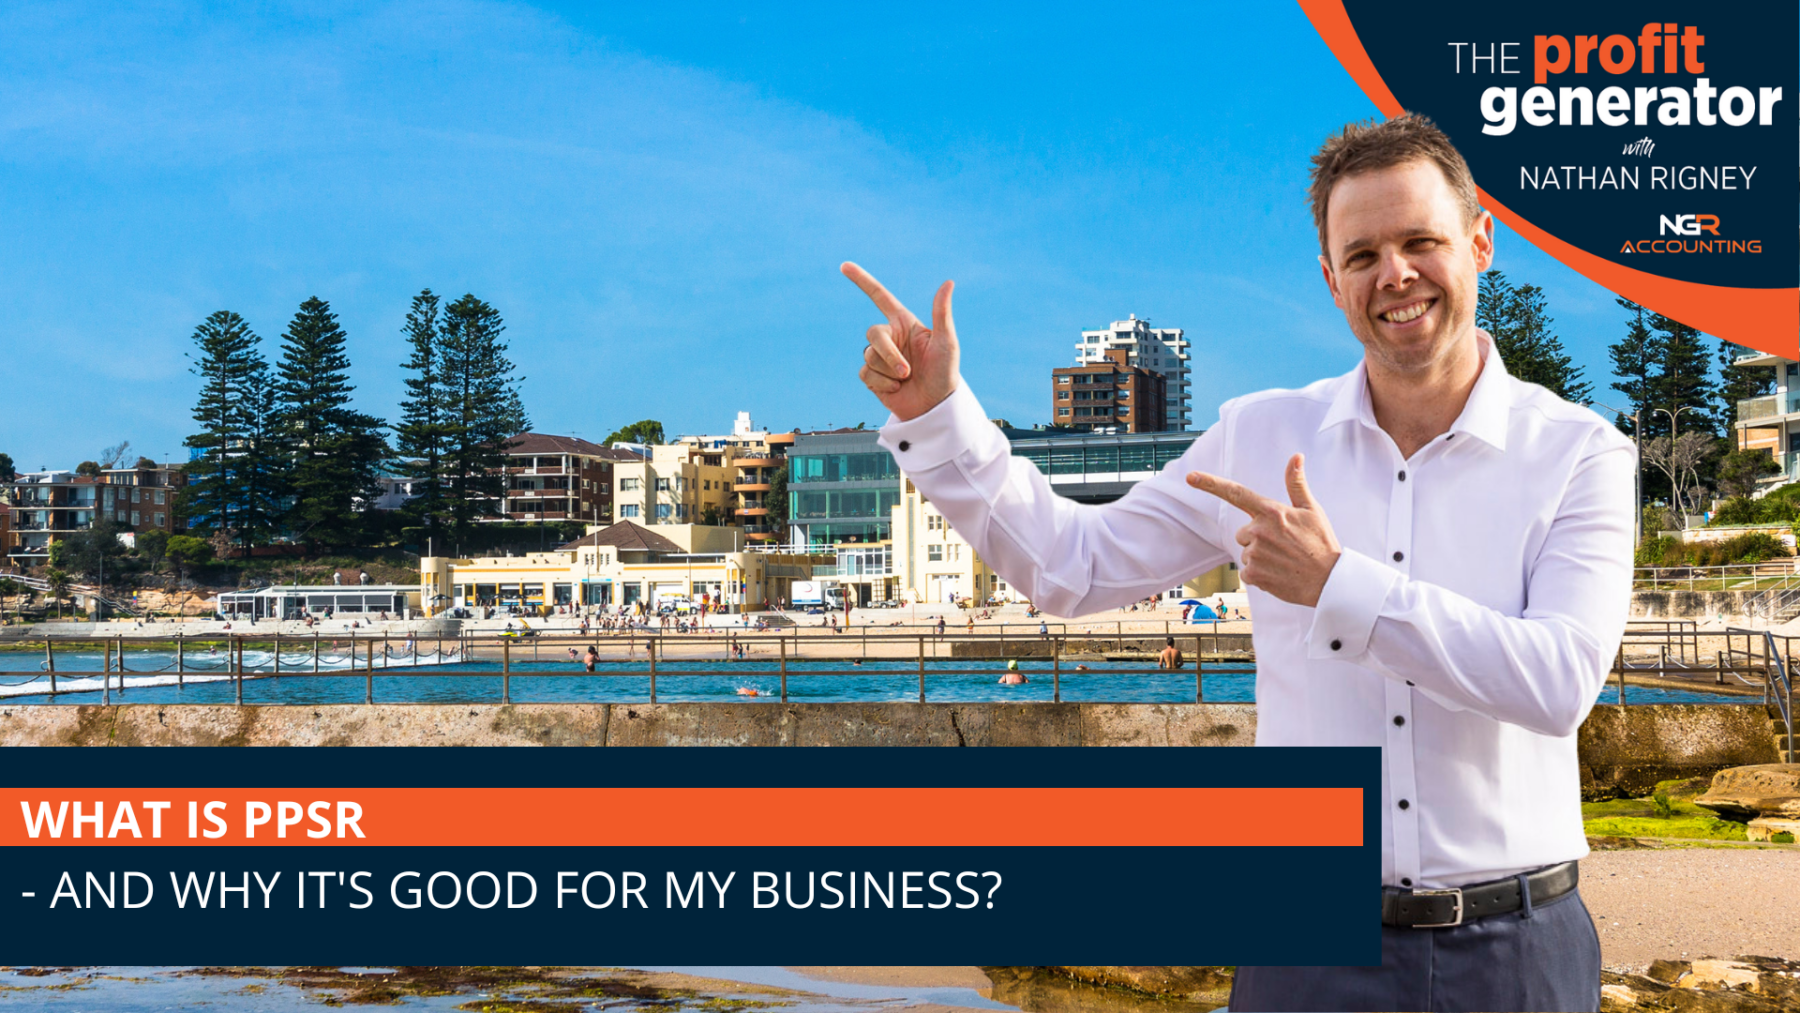 Nathan Rigney in front of an image of Cronulla Beach and Cronulla RSL